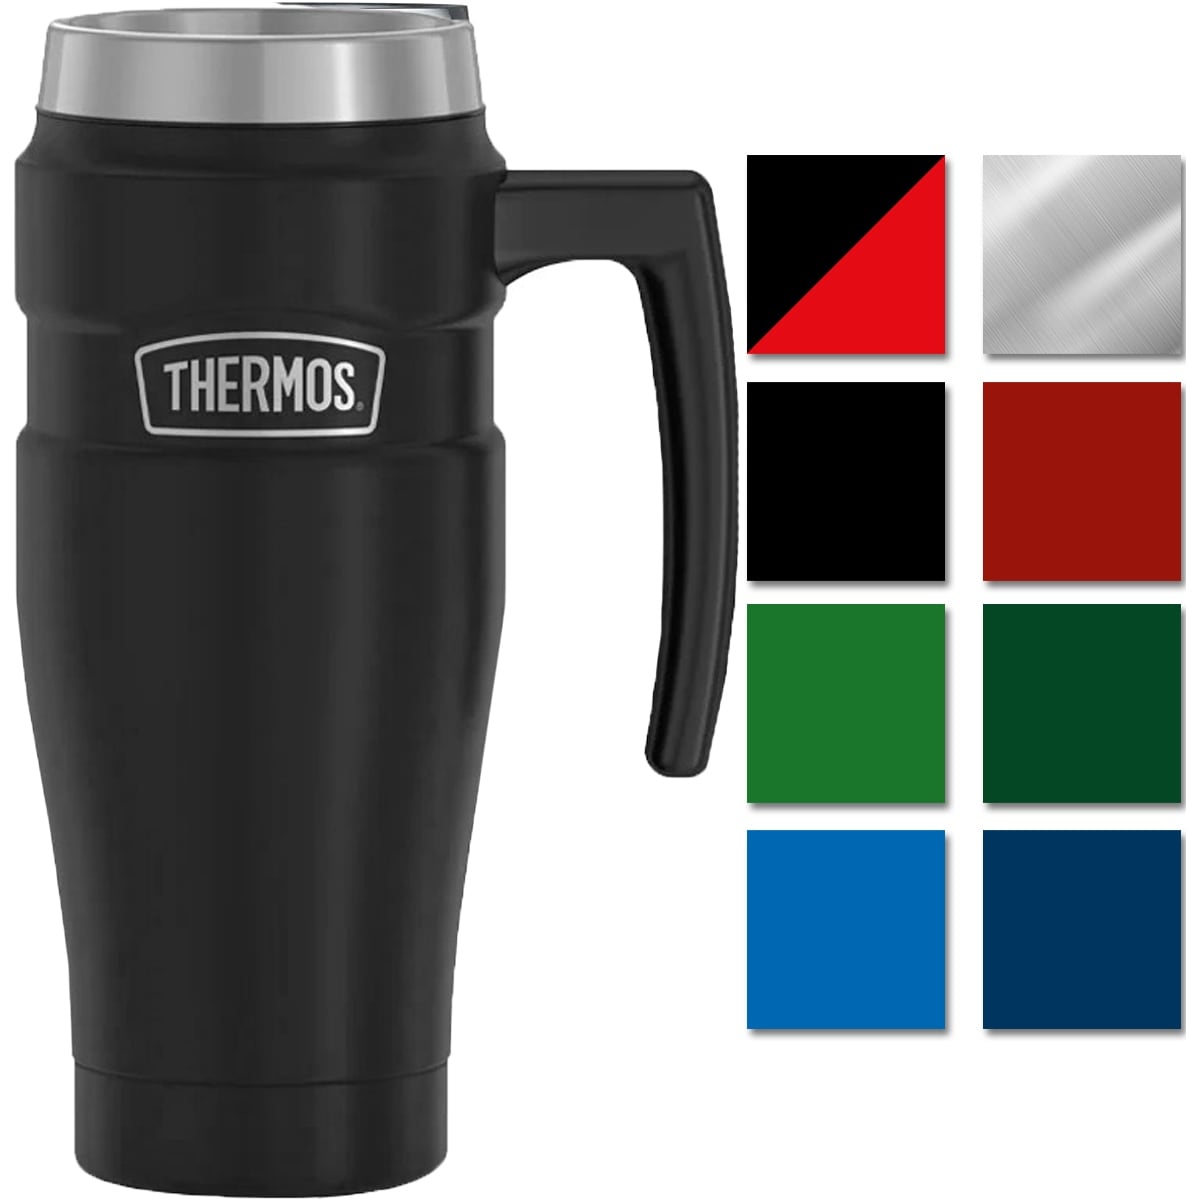 New Thermos 16 Ounce Stainless Steel Commuter Vacuum Insulated Bottle Cup 